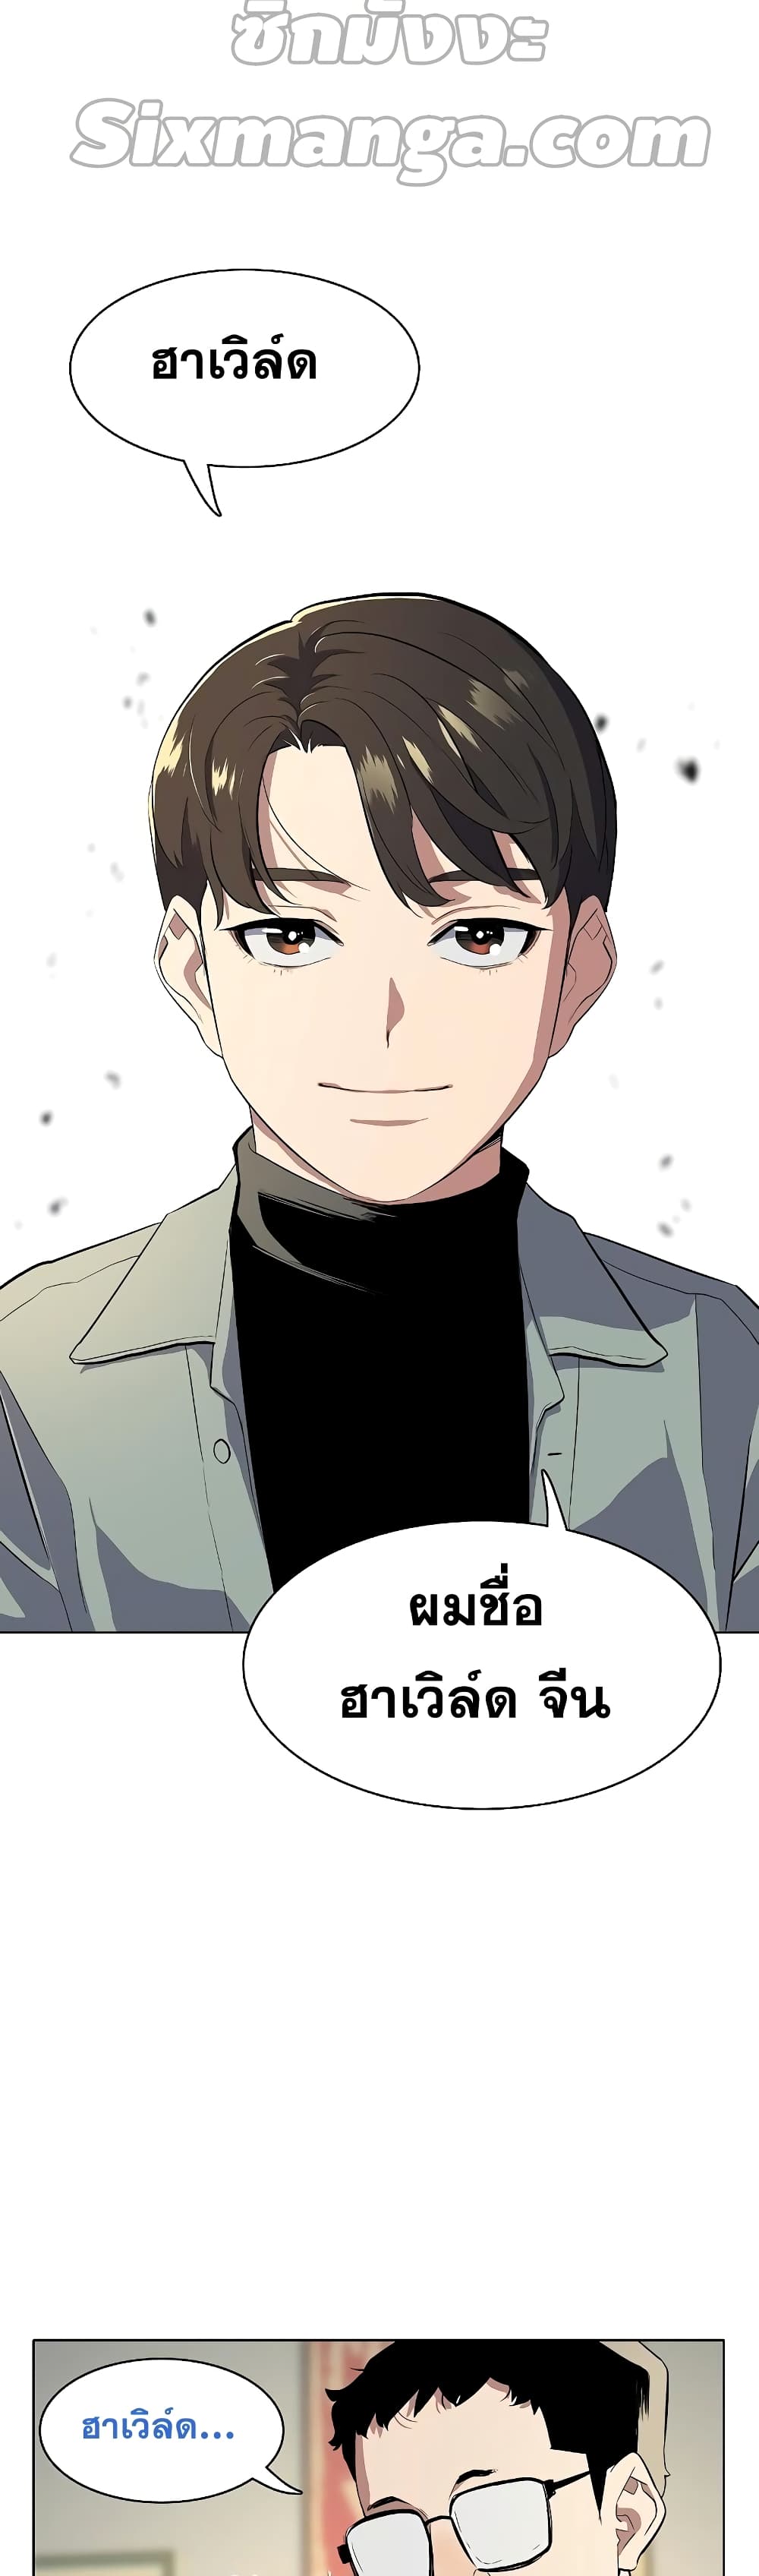 The Chaebeol’s Youngest Son 9-9